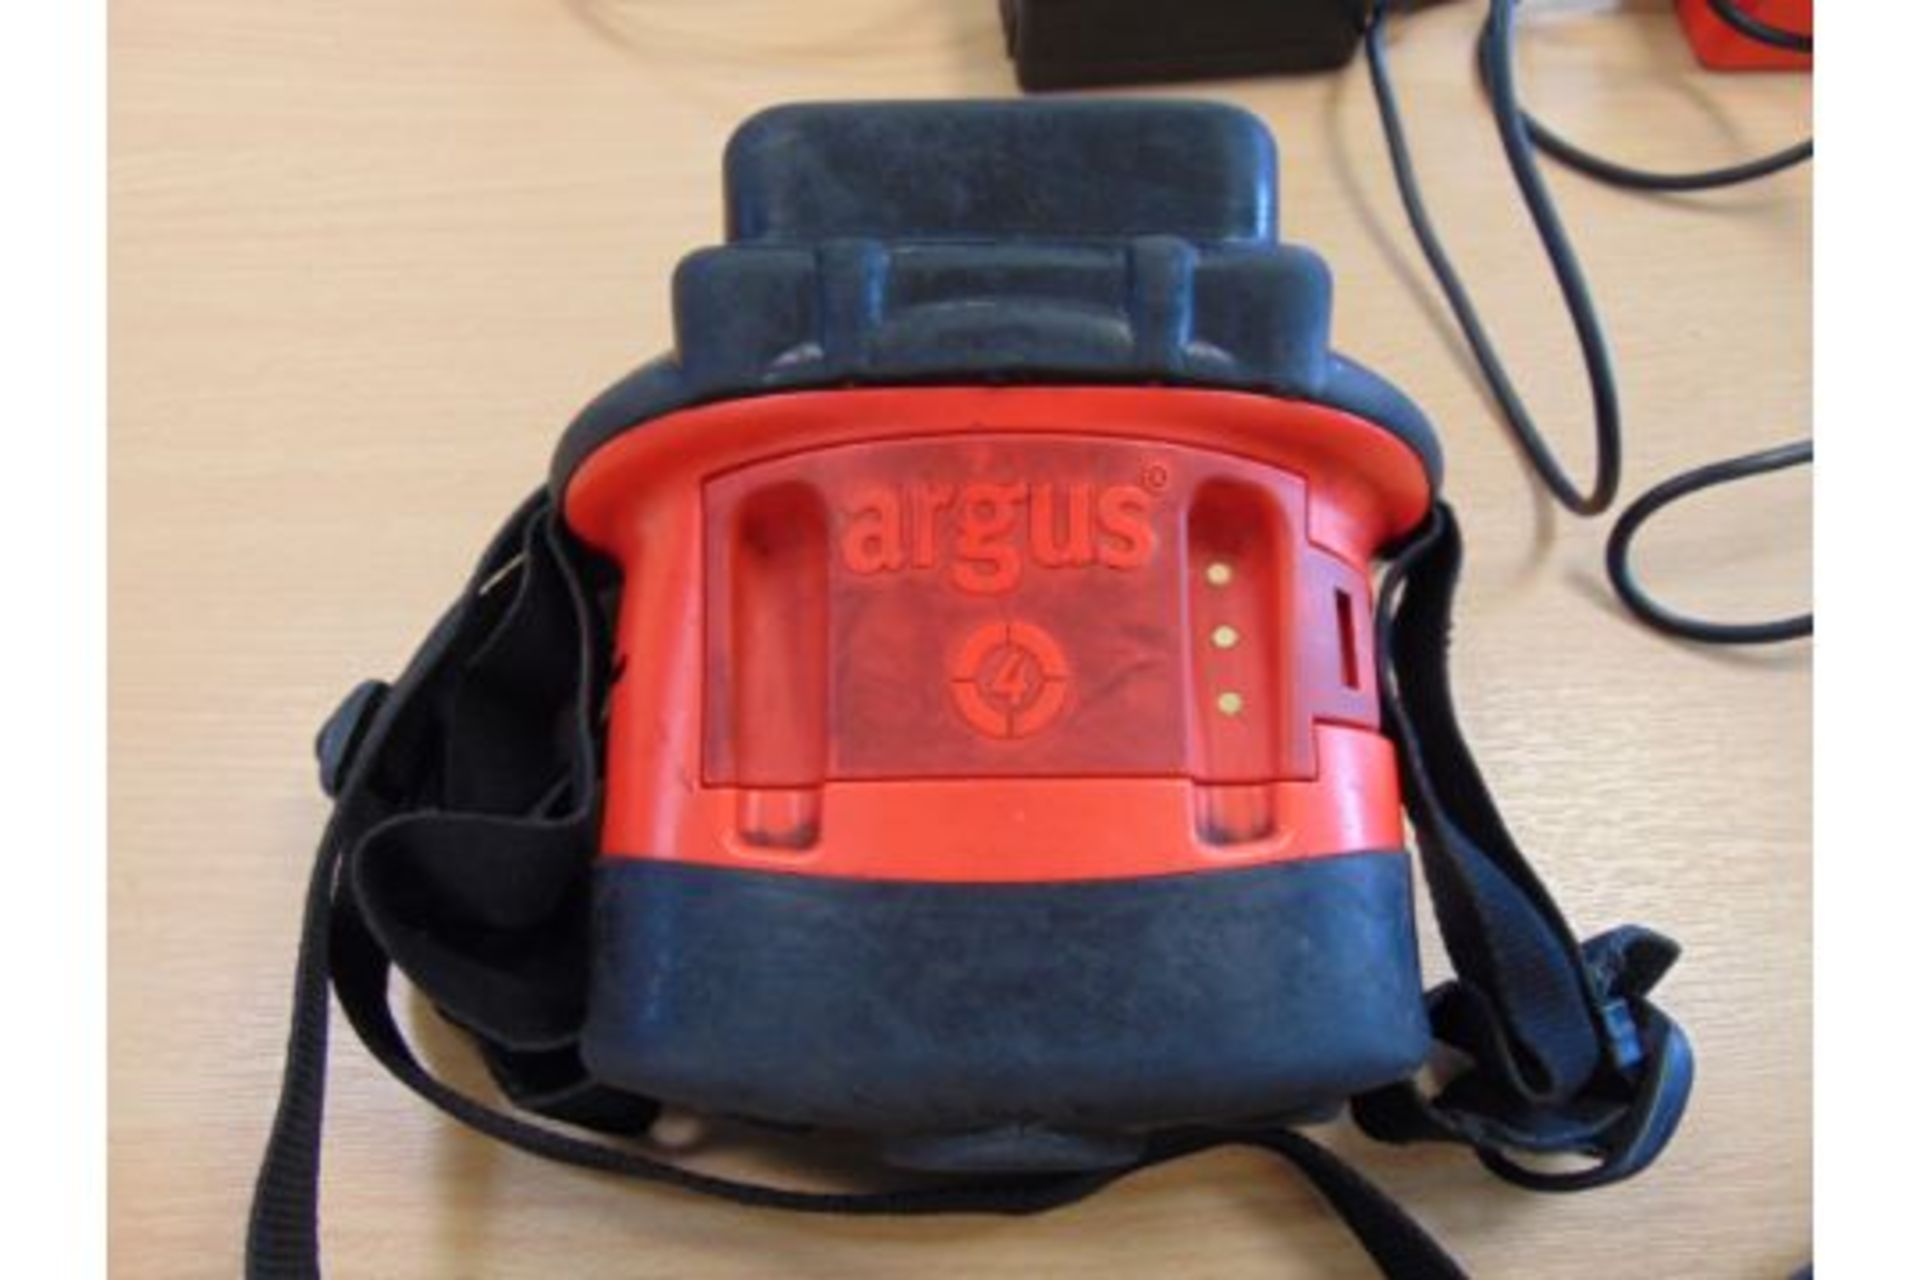 Argus 4 E2V Thermal Imaging Camera w/ Battery & Charger - Image 6 of 8